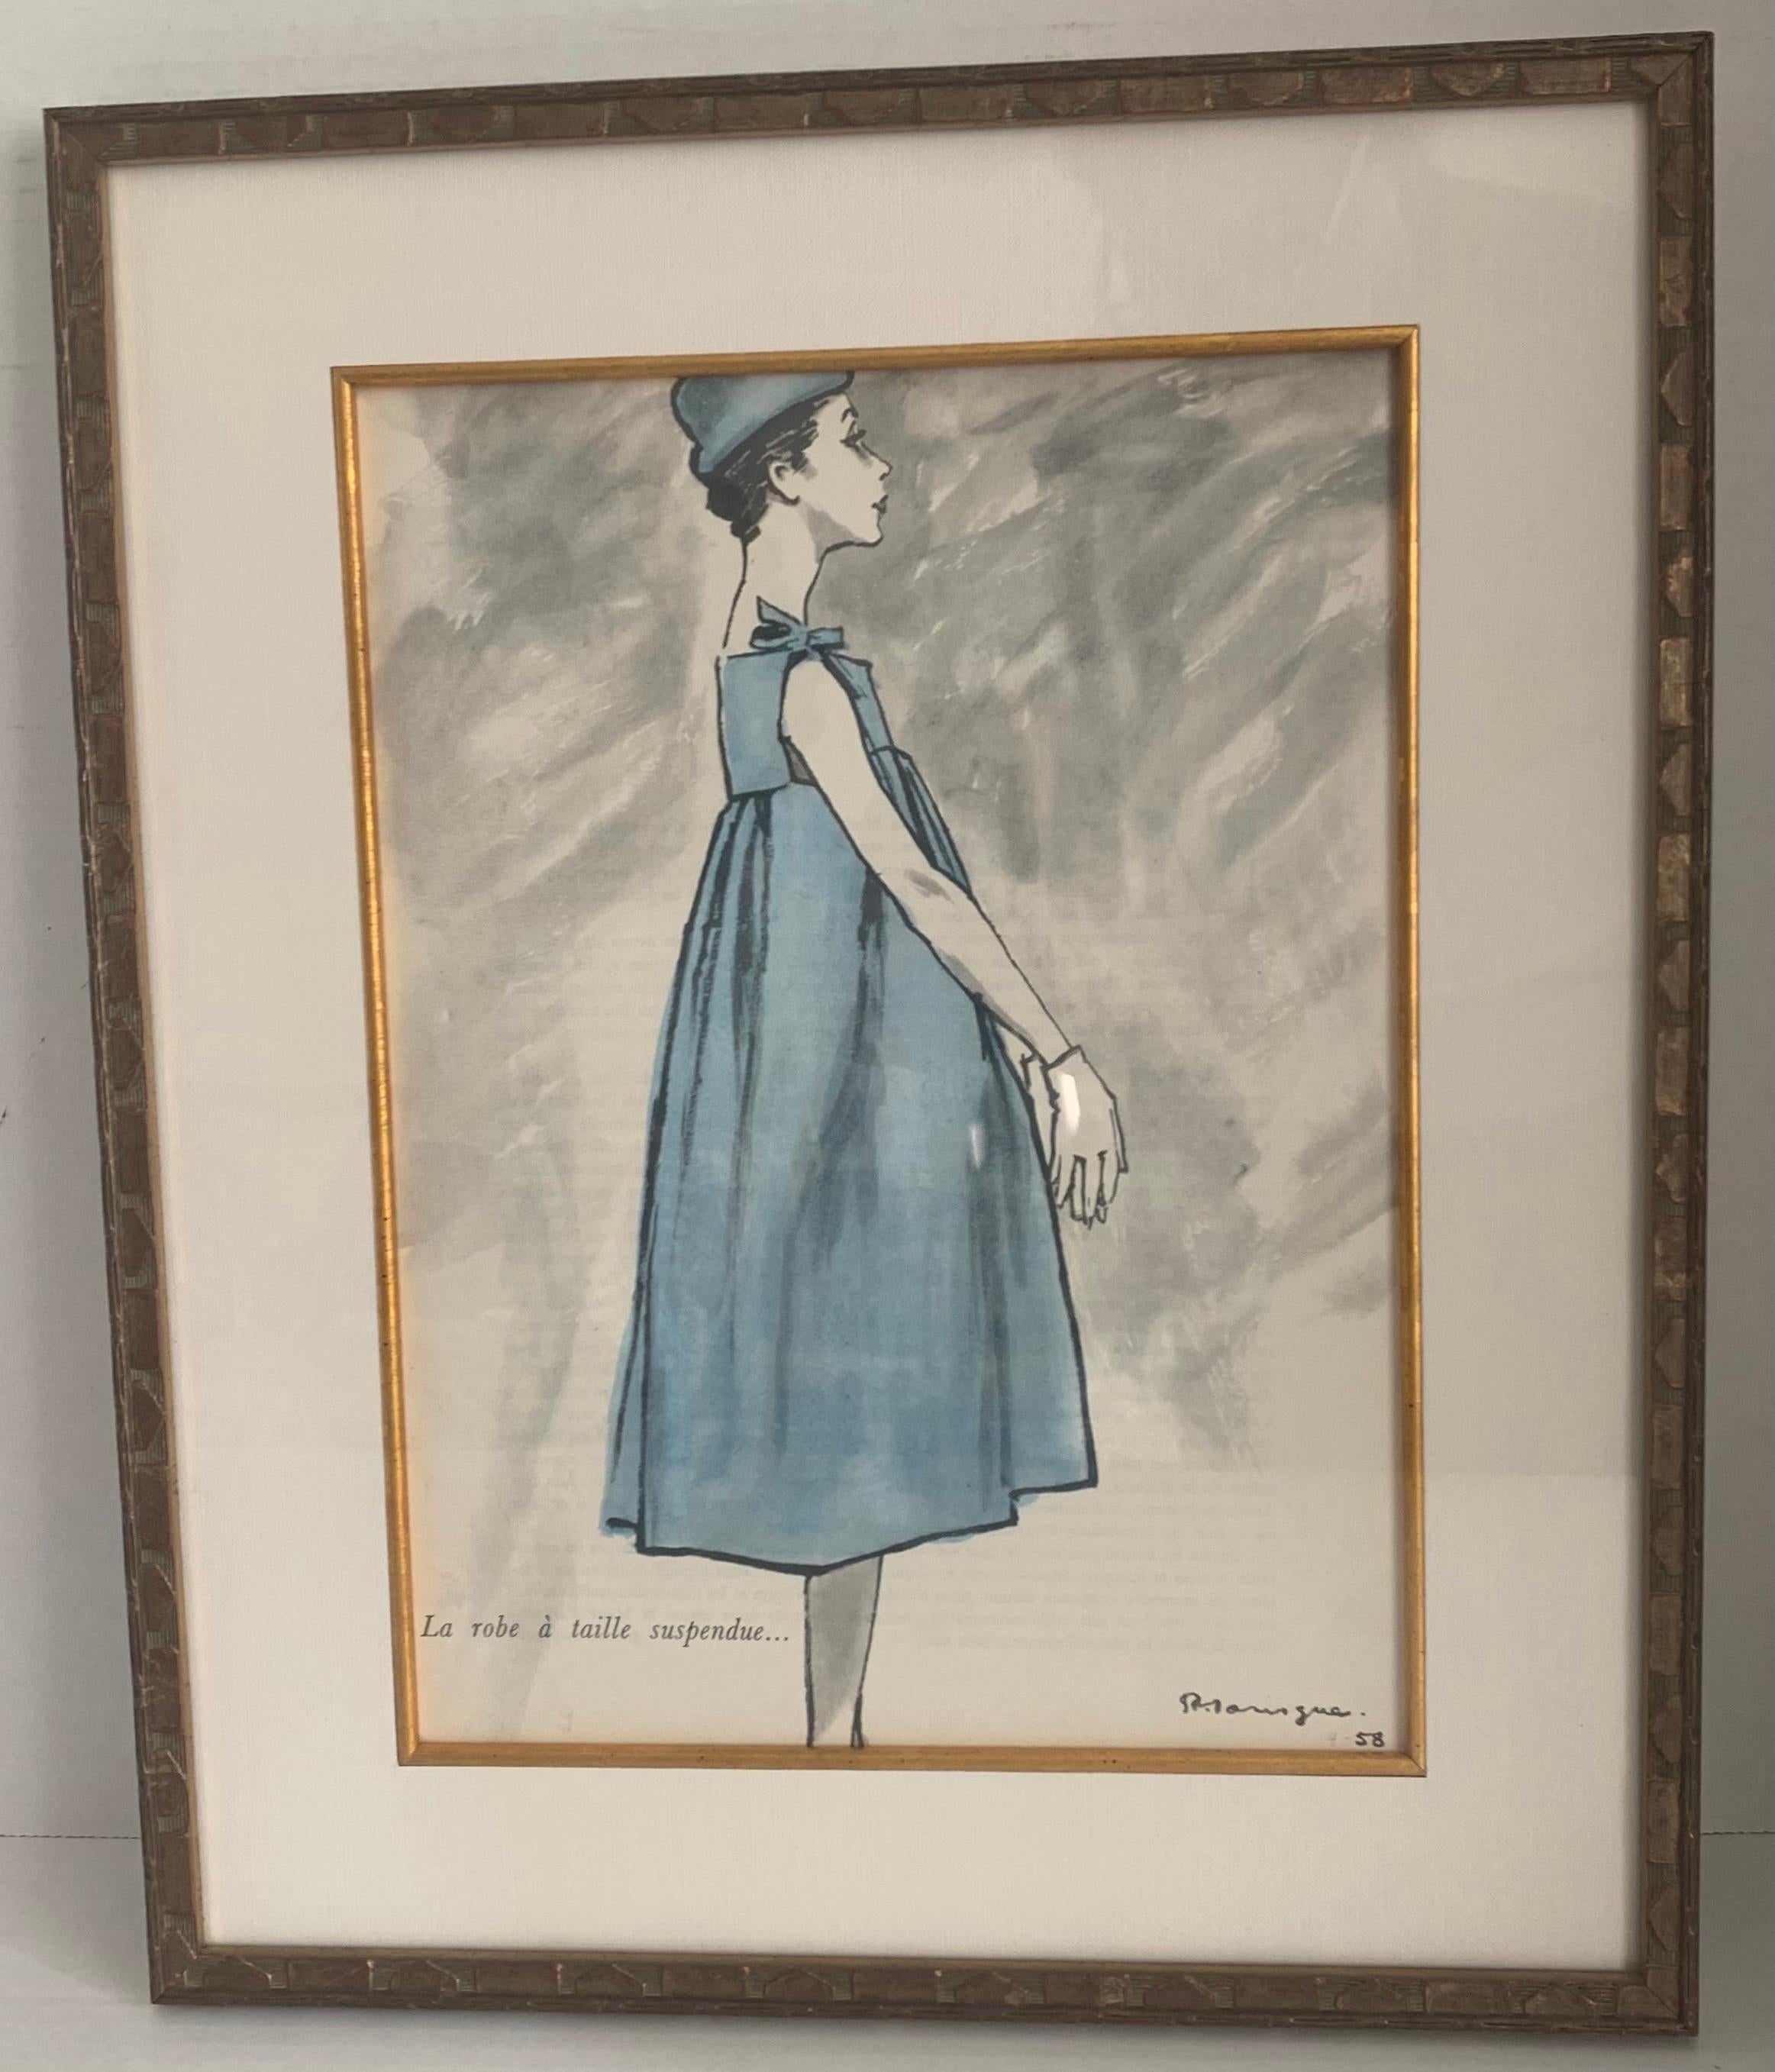 1958 fashion illustration of Givenchy light blue dress and hat print by Pierre Mourgue. Linen backed print. Professionally framed in carved gilt-wood frame.